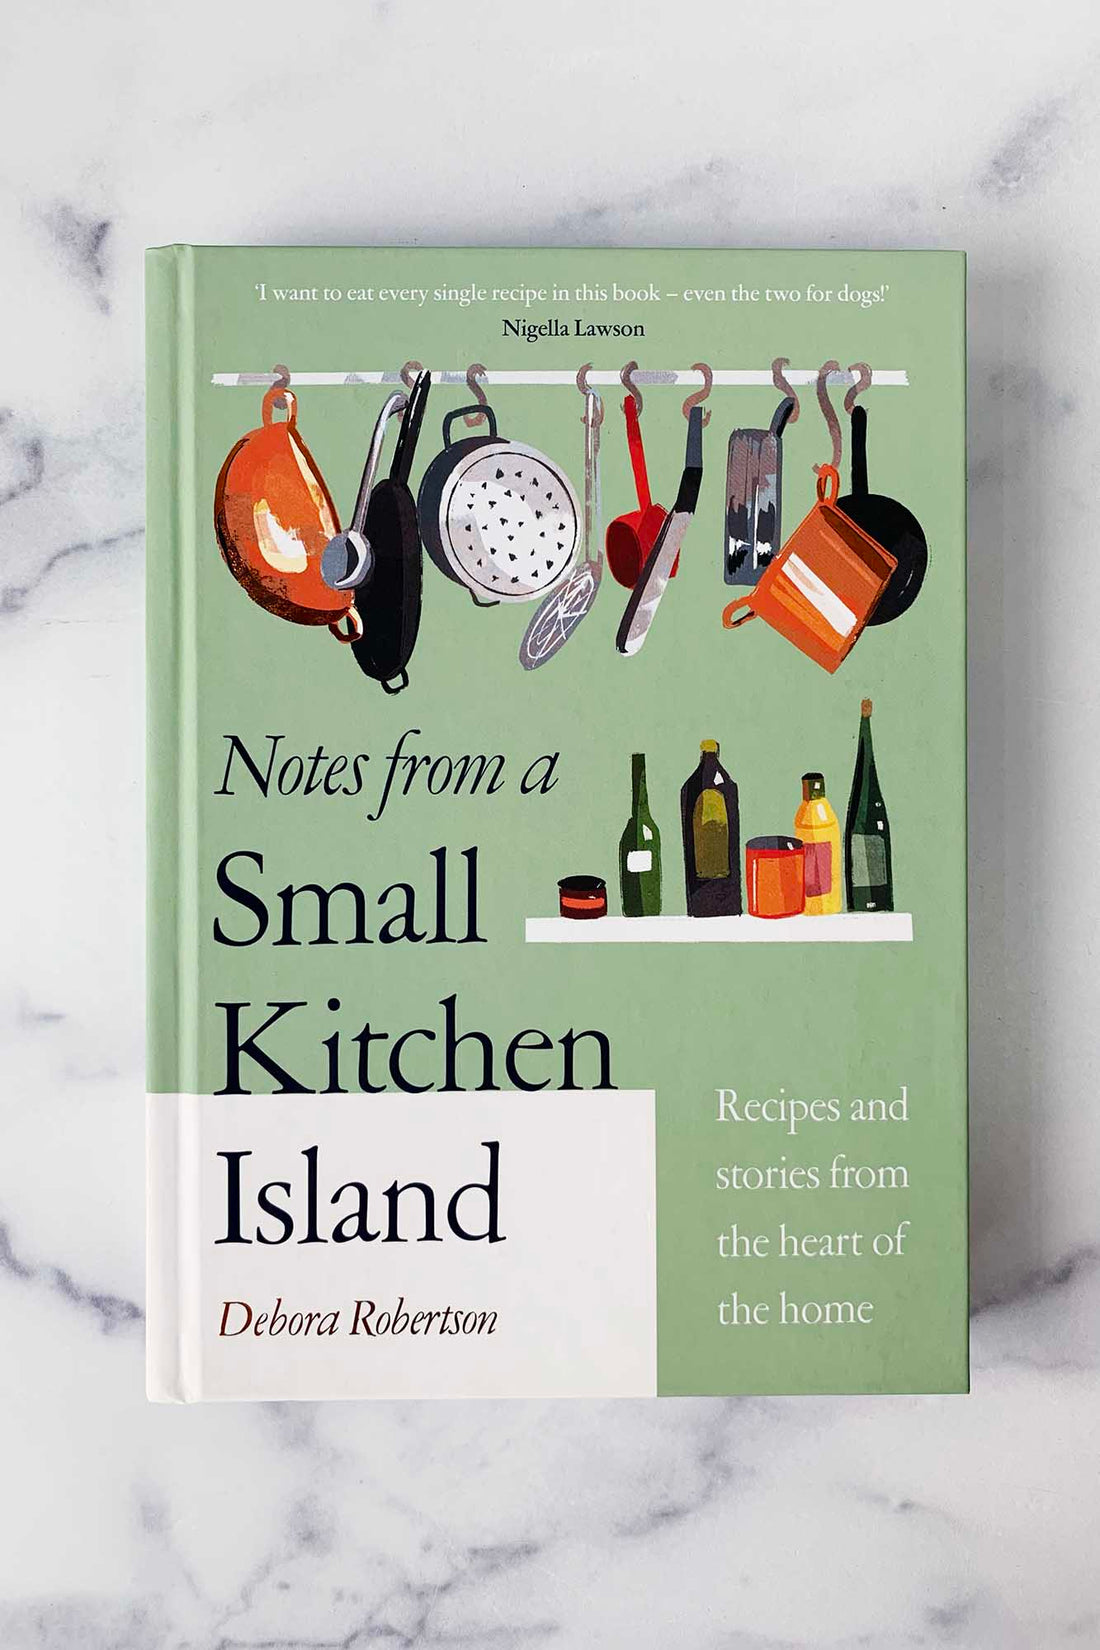 Notes from a Small Kitchen Island (UK Import)